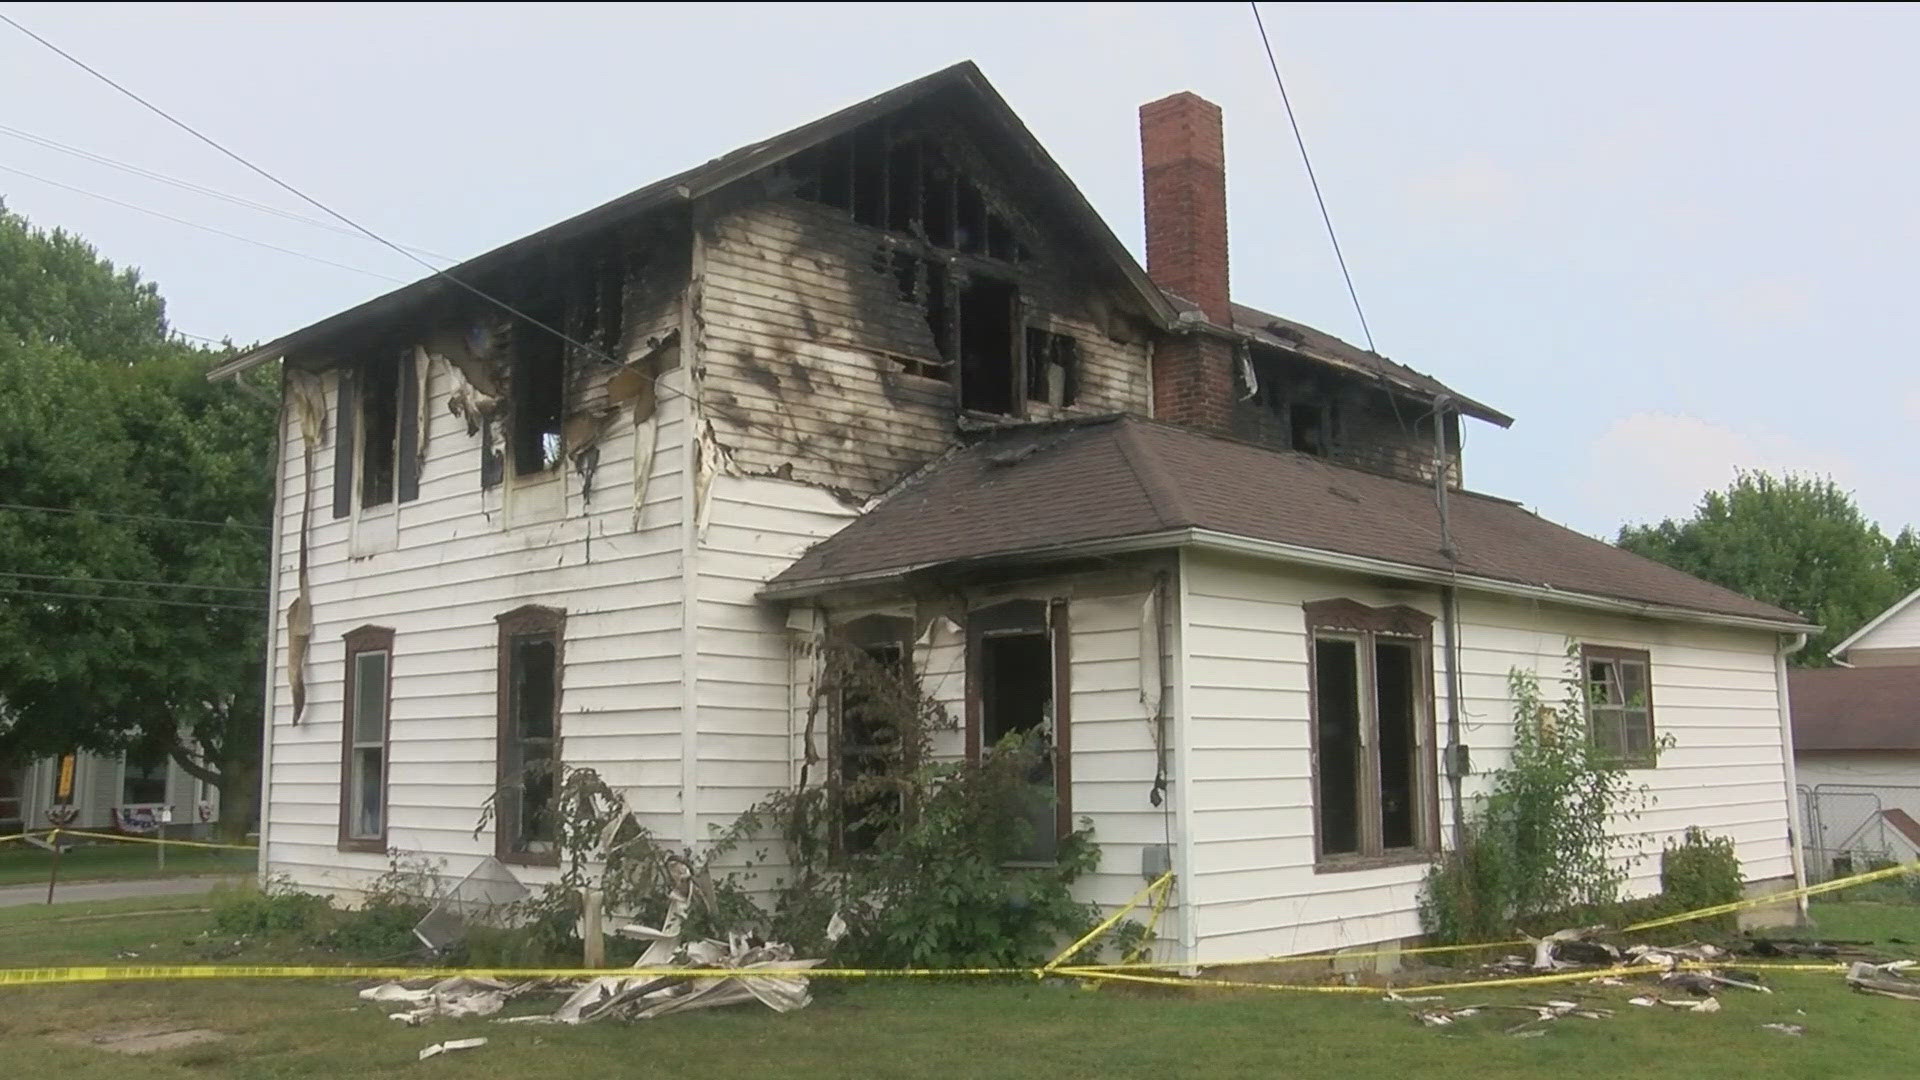 Neighbors who witnessed the tragic fire in the small village of Fayette say it is something they will never forget.